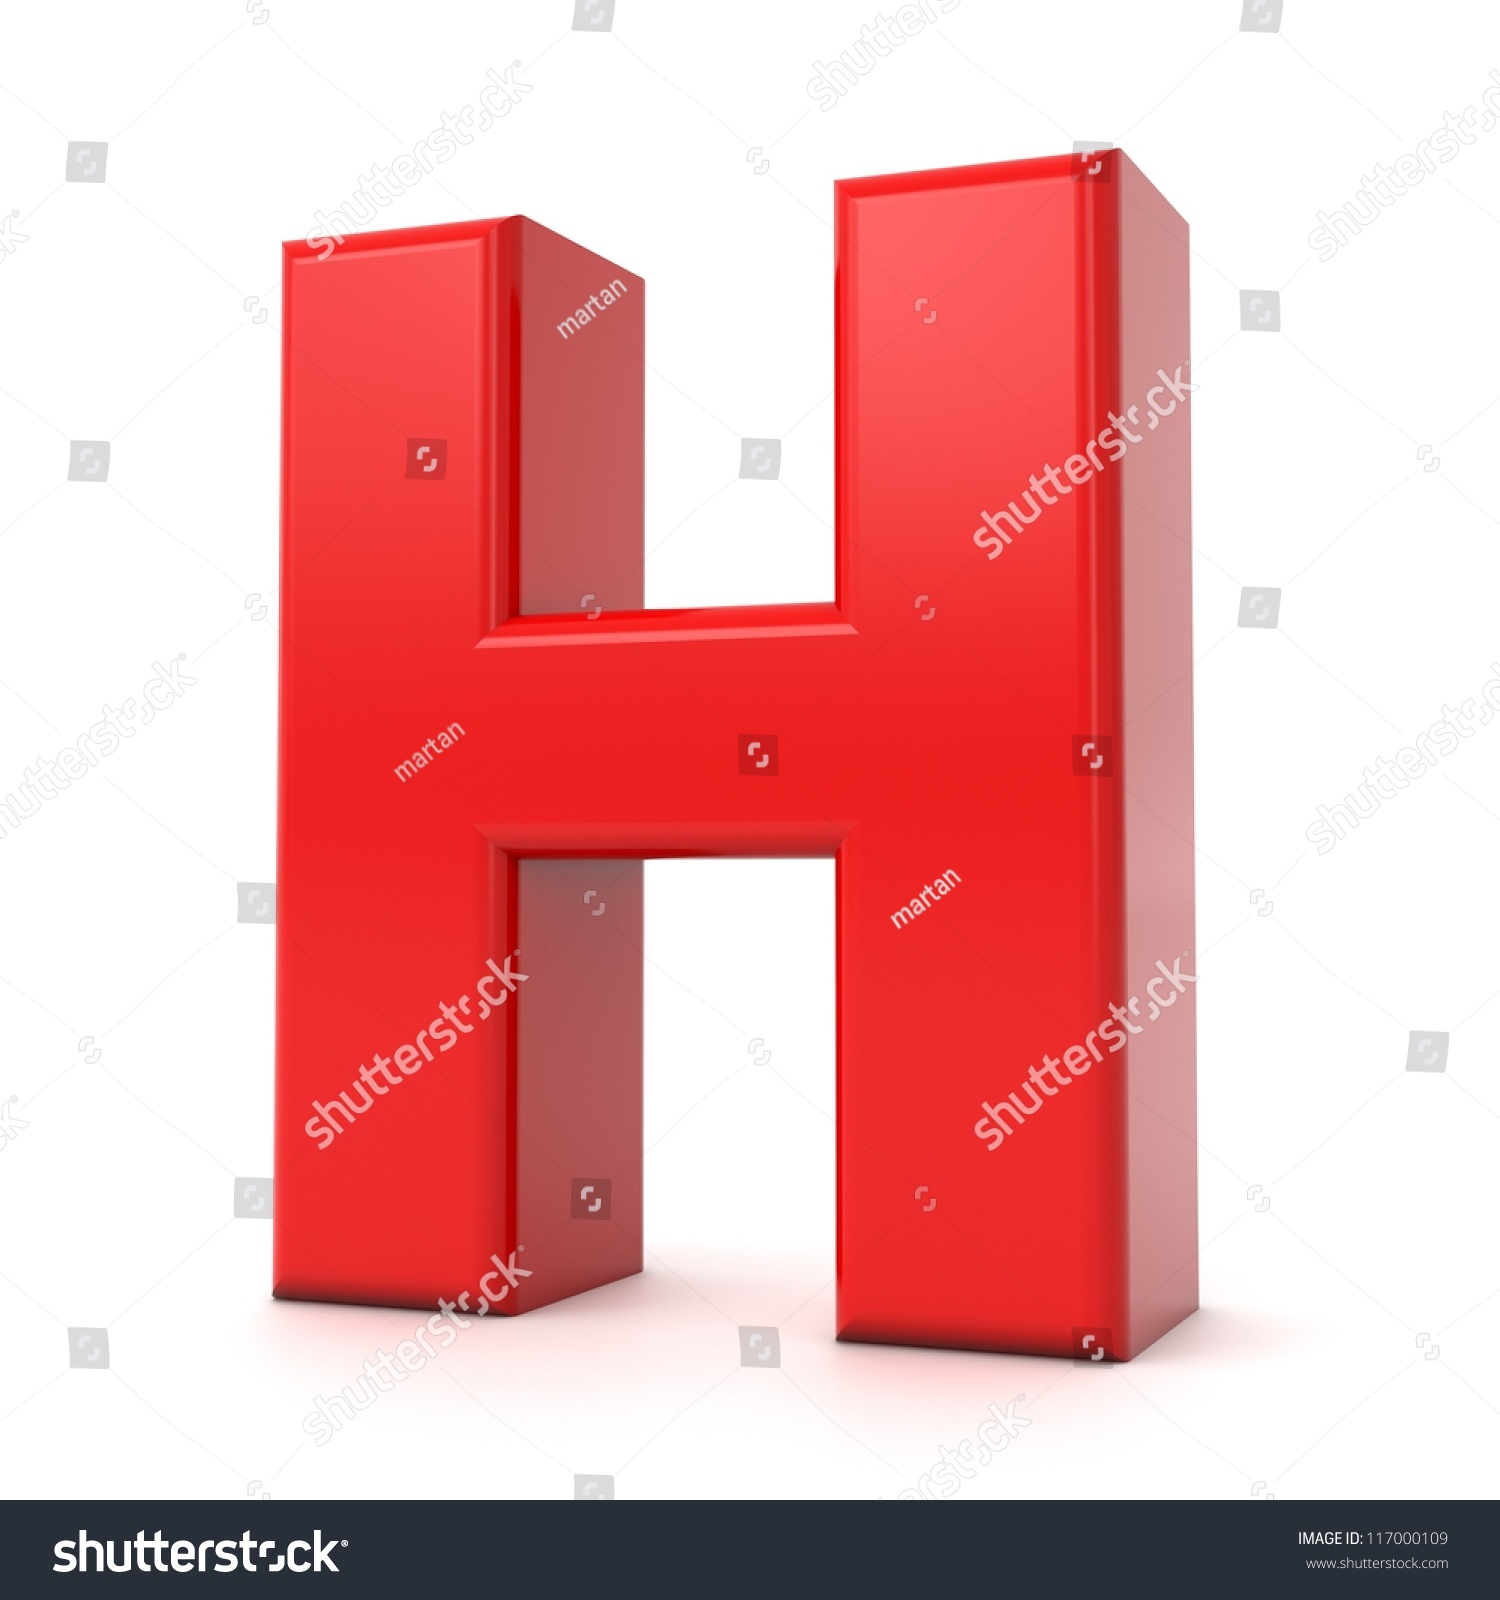 3d Shiny Red Letter Collection - H Stock Photo 117000109 : Shutterstock